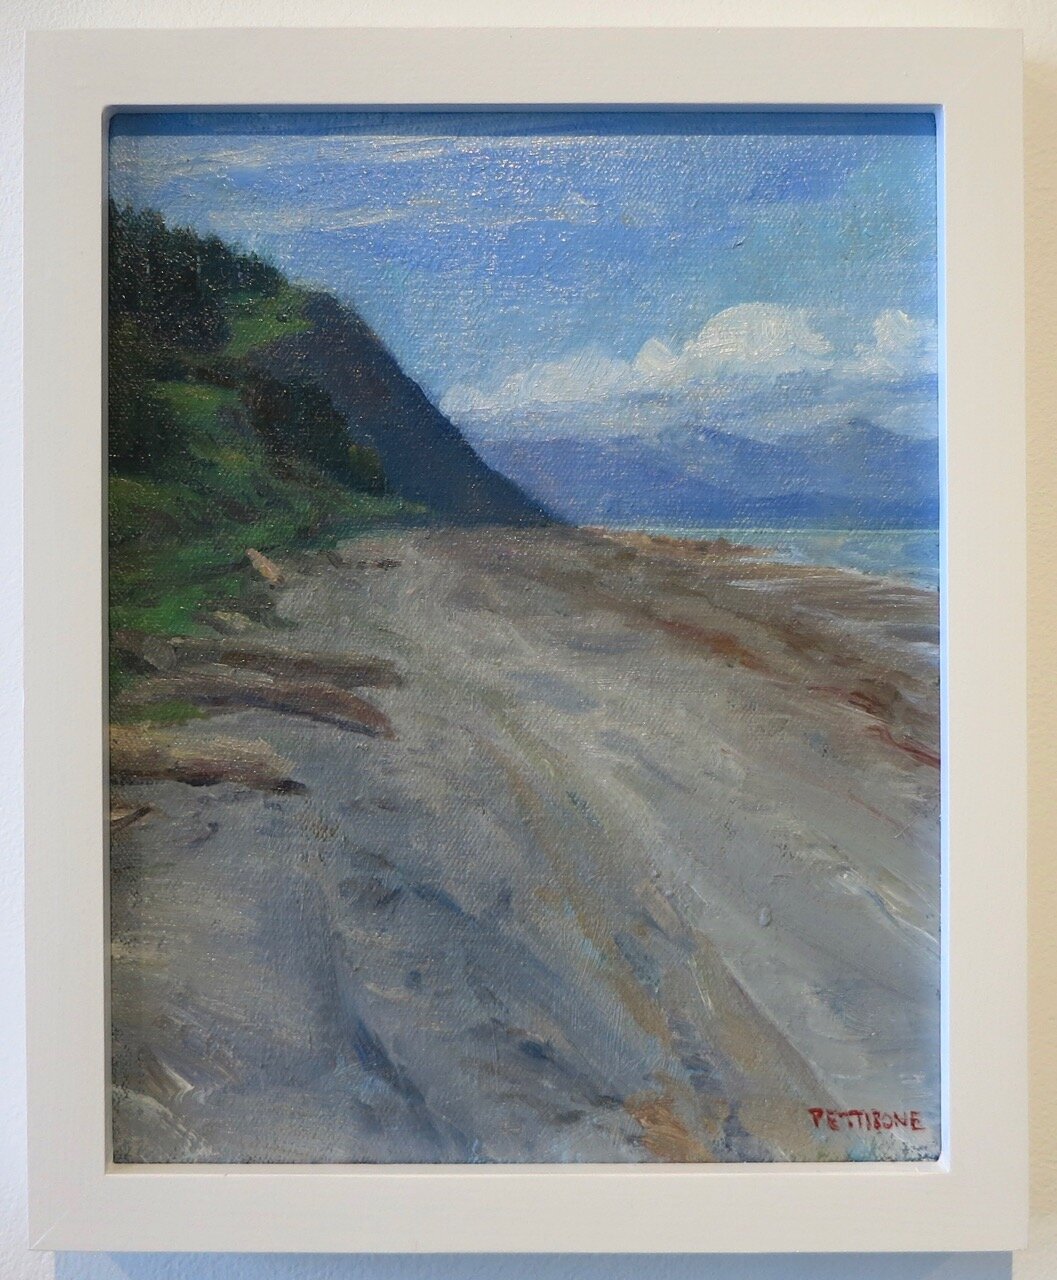    Anchor Point Beach Looking South , 2020   Oil on canvas  10x8 inches 